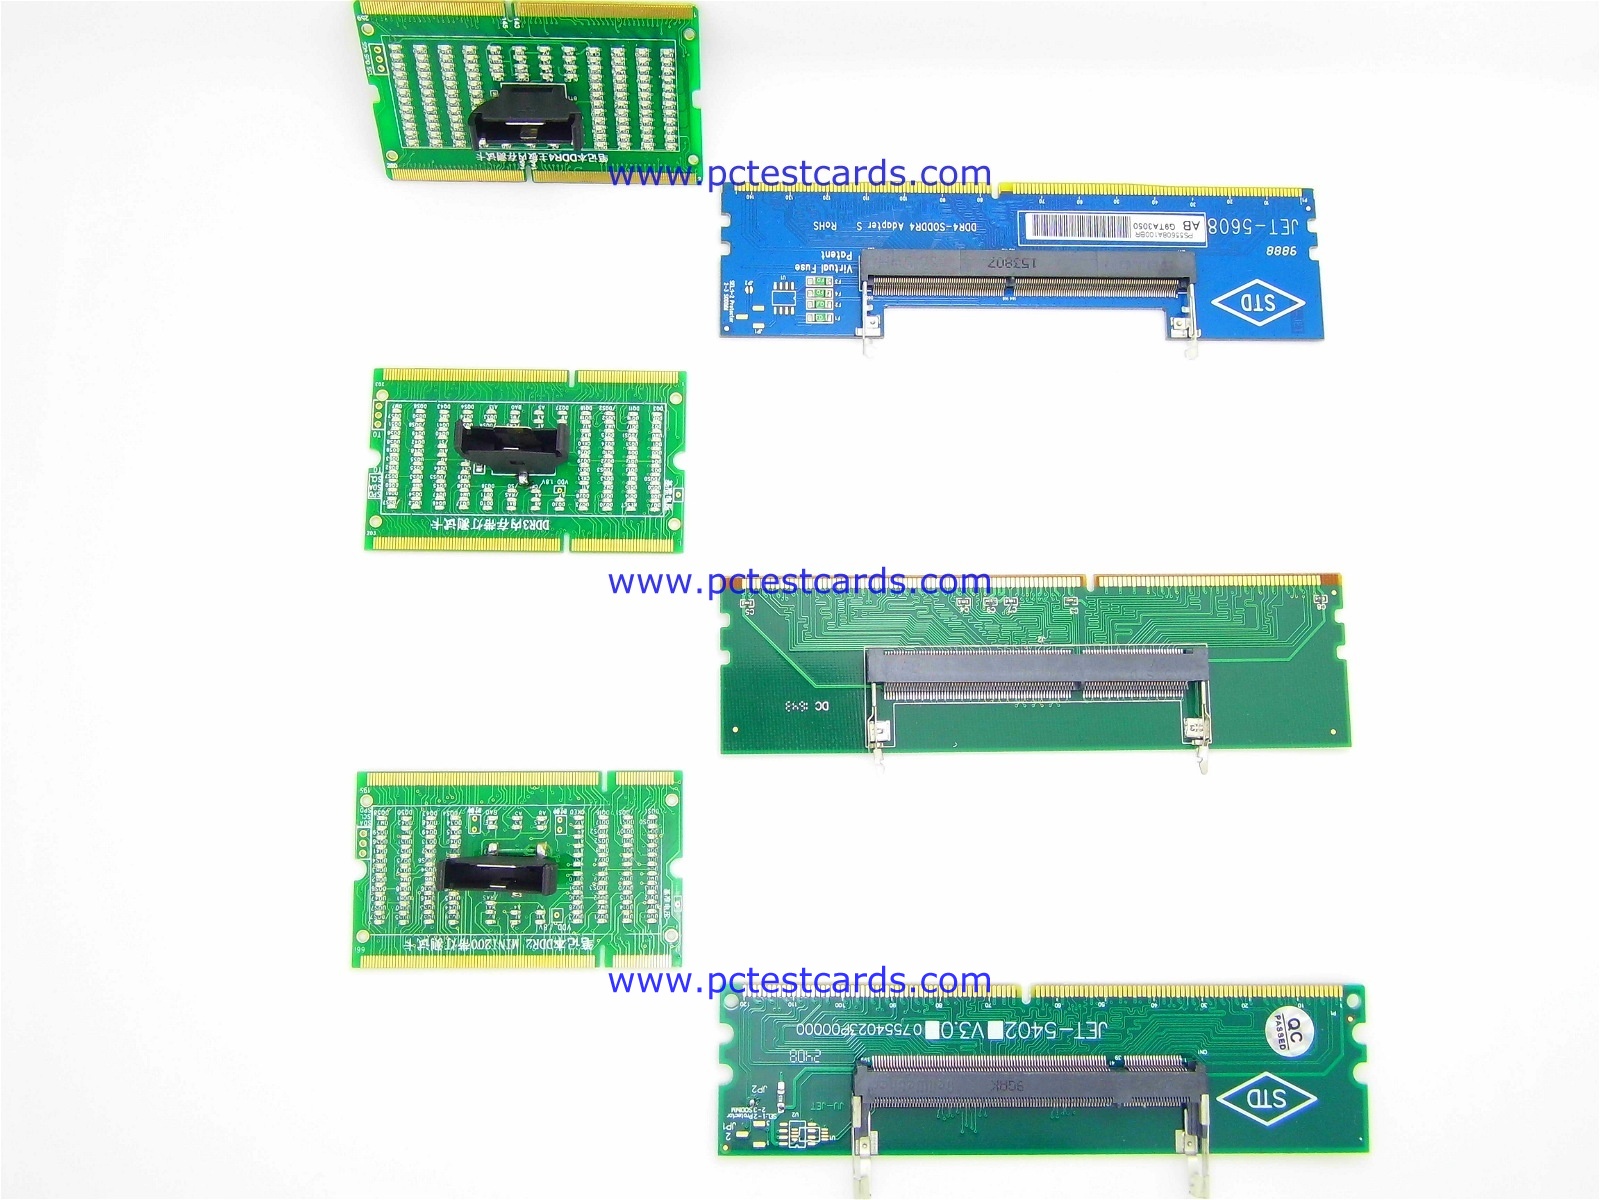 New Complete DDR2 DDR3 DDR4 Laptop Memory RAM Slots and Memory Module Solution Diagnostic Analyzer Kit